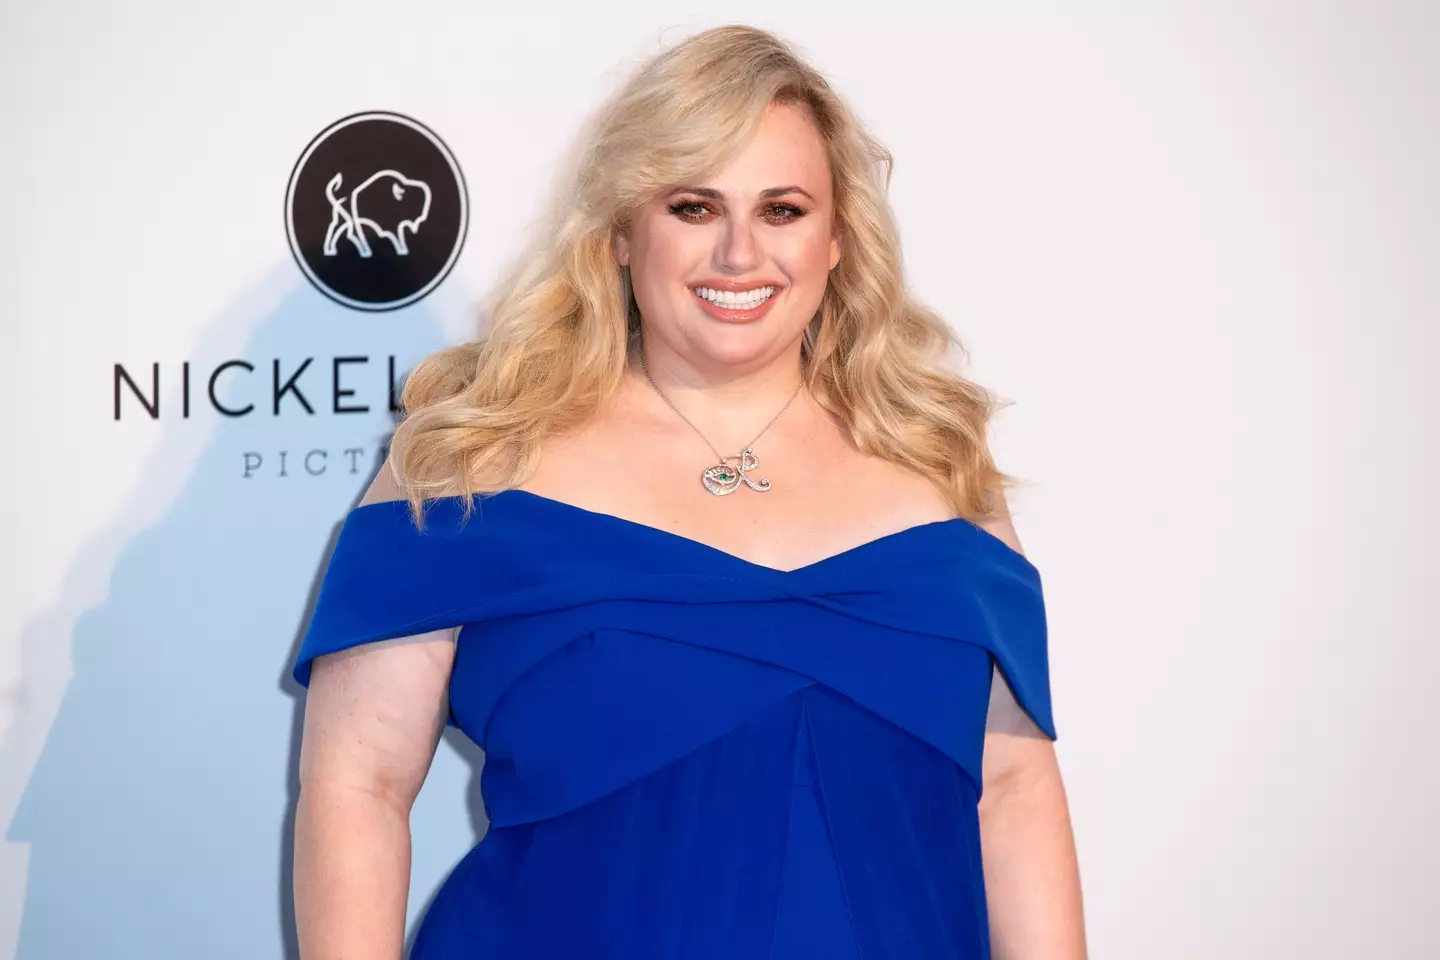 Rebel Wilson announced her relationship in a post on Instagram.